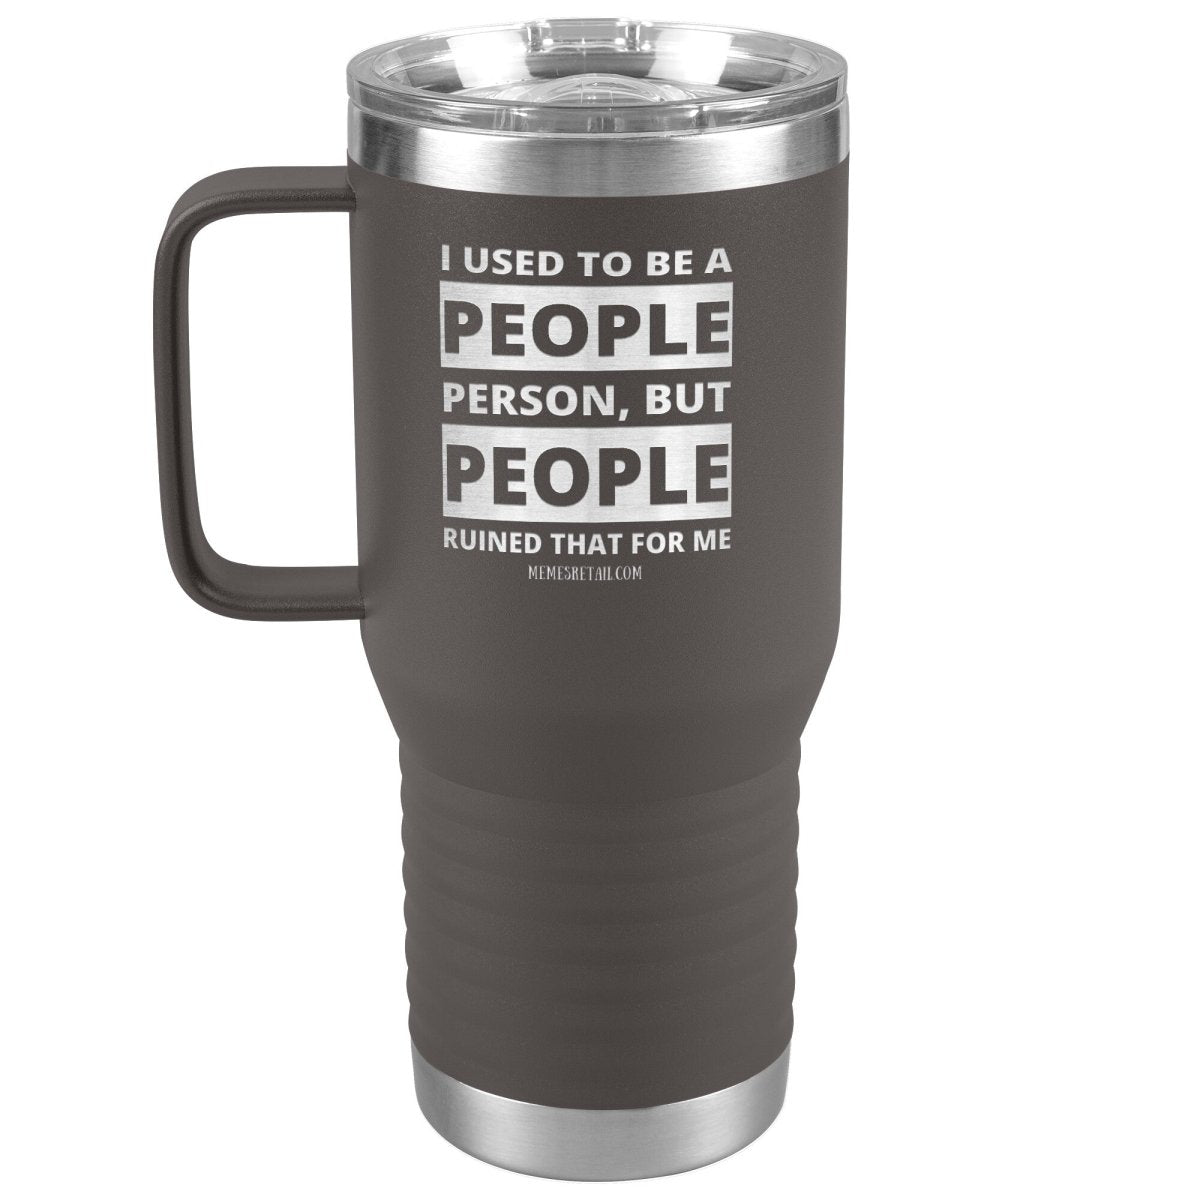 I Used To Be A People Person, But People Ruined That For Me Tumblers, 20oz Travel Tumbler / Pewter - MemesRetail.com